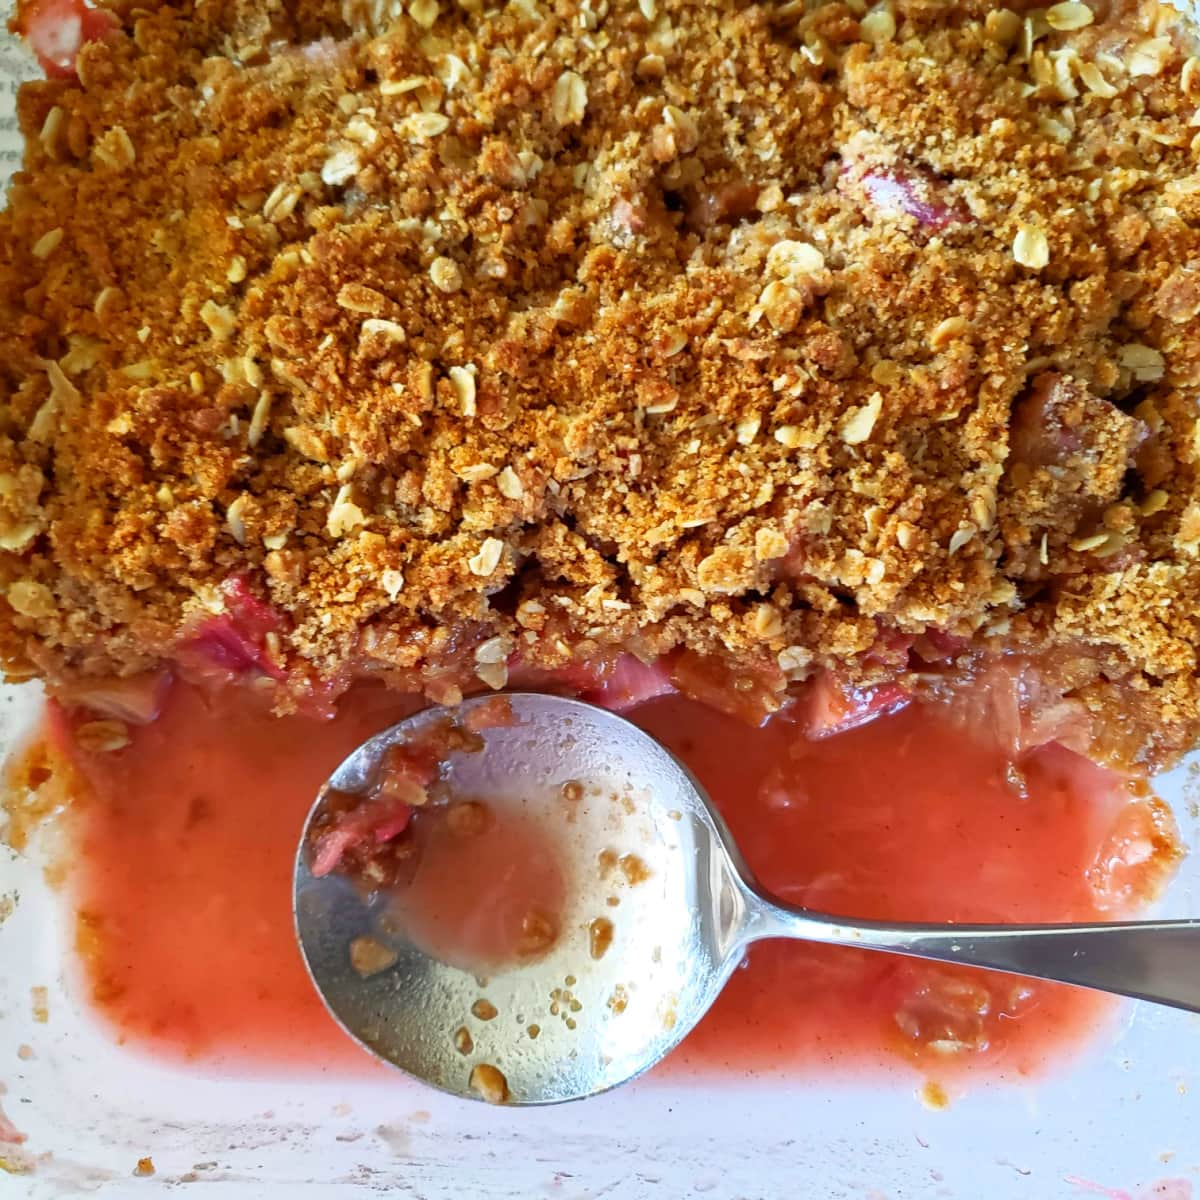 One third of the lower portion of Rhubarb Crumble is gone with juice left behind in the baking dish and a large spoon in the dish 